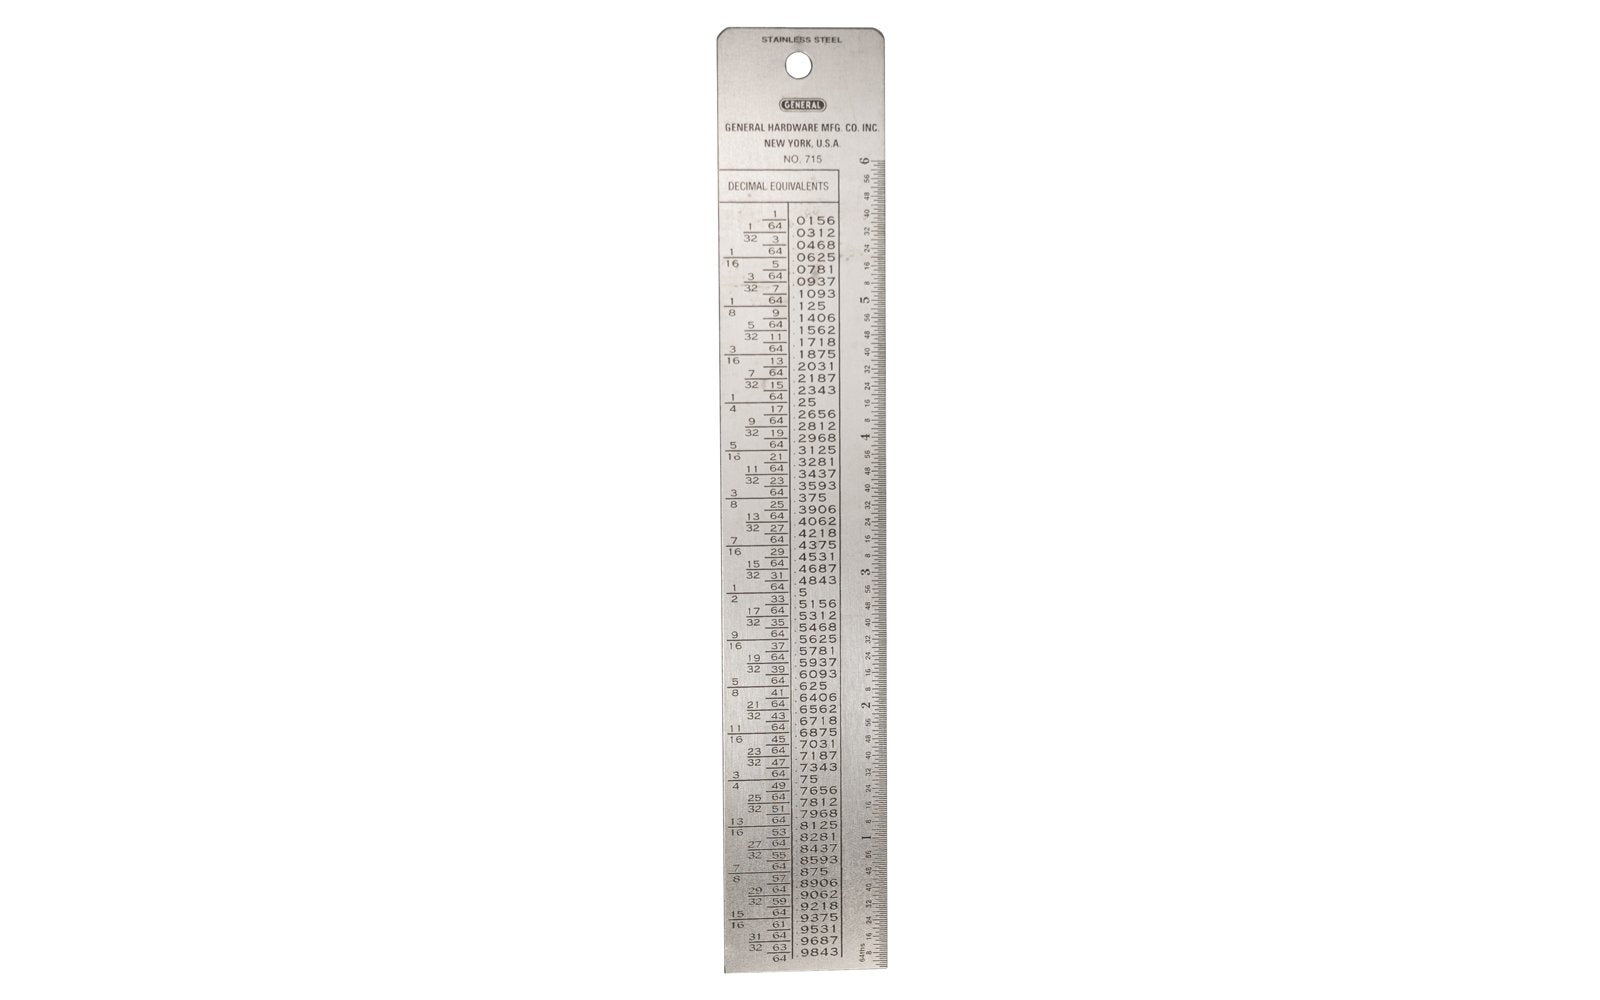 General Tools 6" Stainless Tap & Drill Reference - Model No. 715 ~ Double-sided guide features a Tap Drill Depth Chart, decimal conversions from 1/64" to 63/64" & a ruler graduated in 64ths - The Tap Drill Reference Table works with National Fine, National Course, American Standard Pipe and Metric threads 